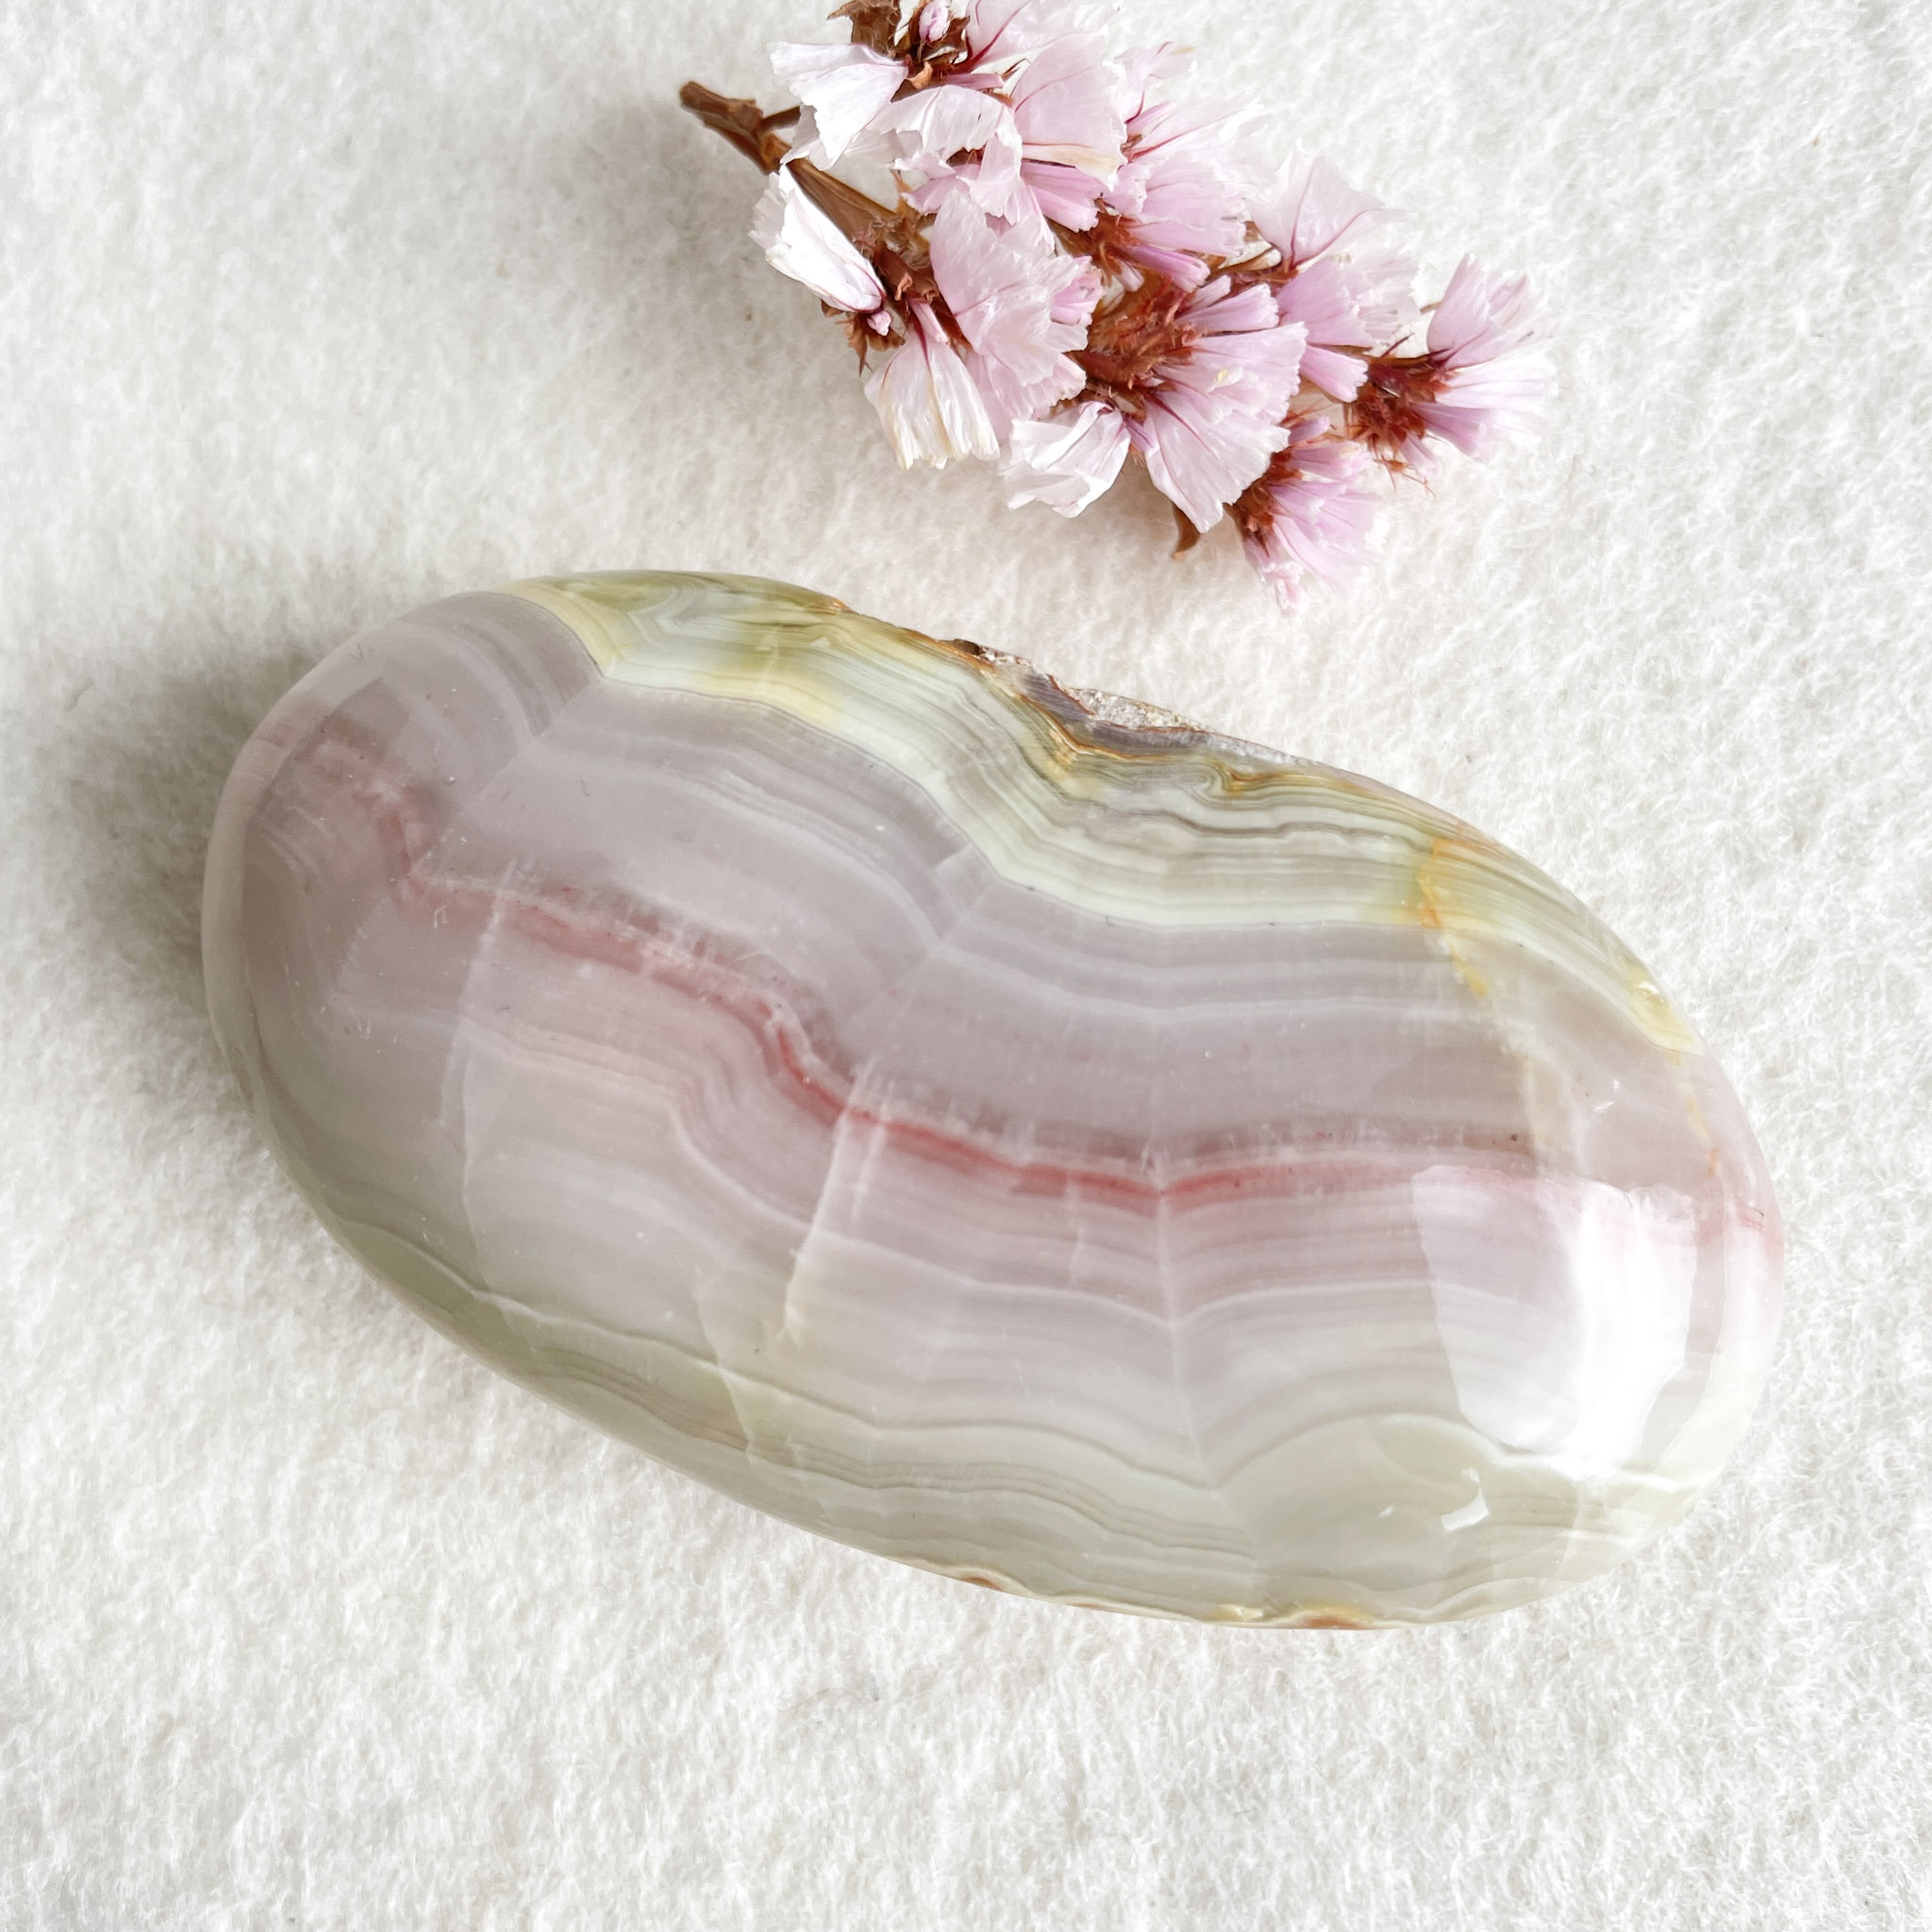 A polished oval agate stone with translucent layers of pink and white, alongside a few sprigs of pink cherry blossoms, on a white textured background.